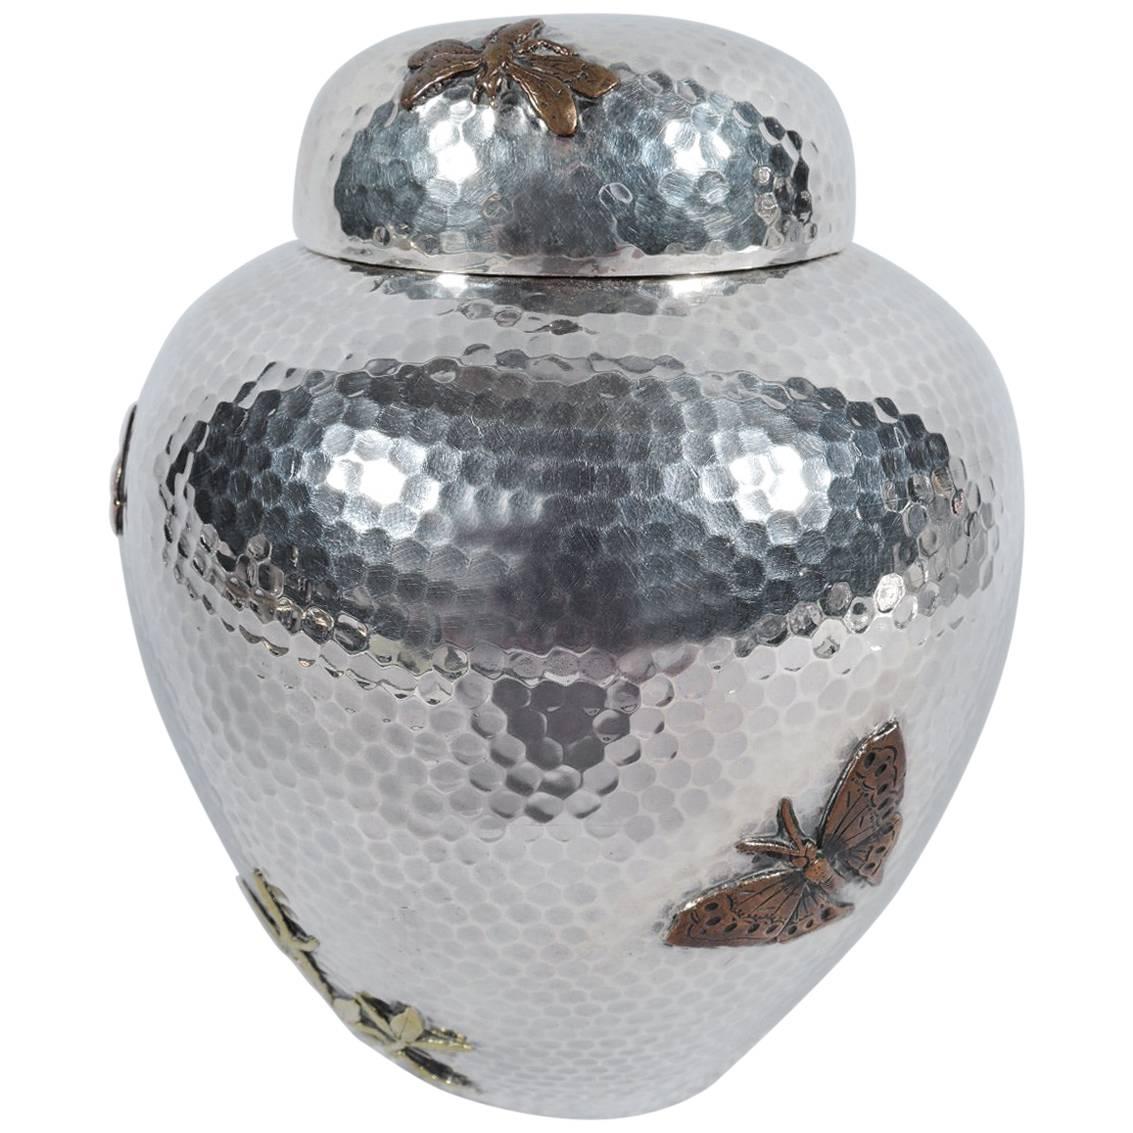 Dominick & Haff Large Hand-Hammered Sterling Silver and Mixed Metal Tea Caddy